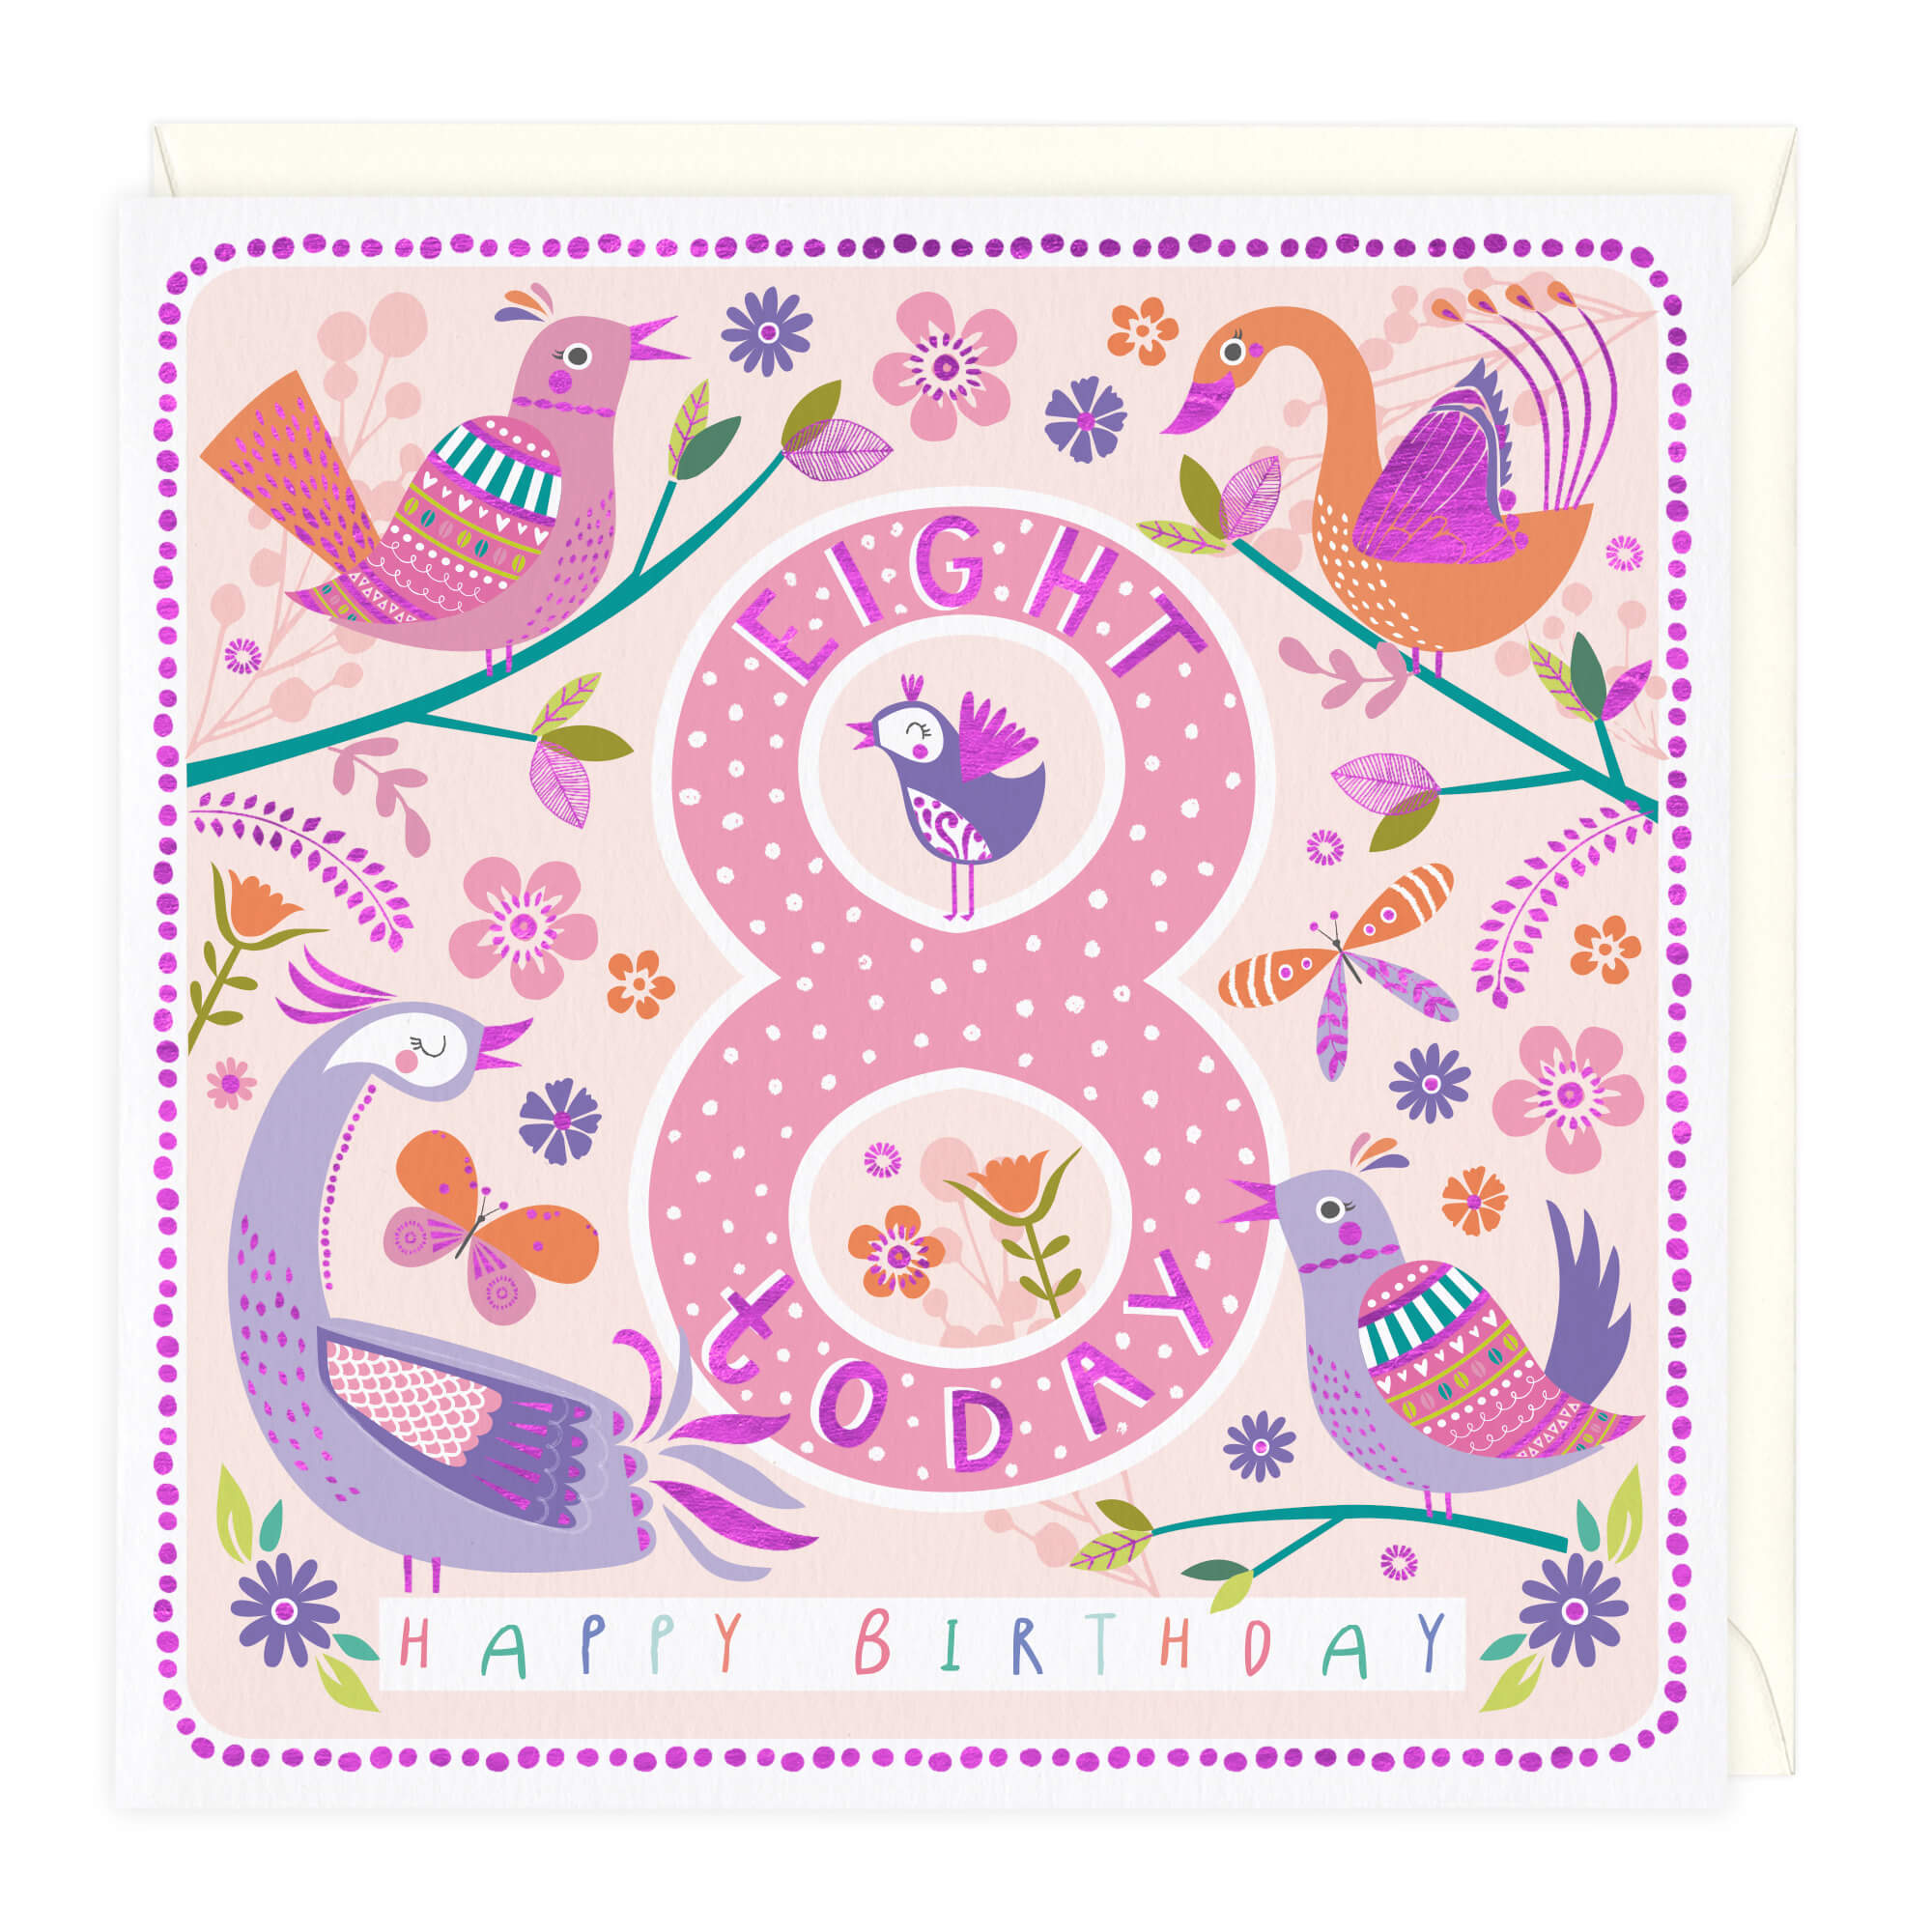 An image of 8 Today Happy Birds Birthday Card Whistlefish